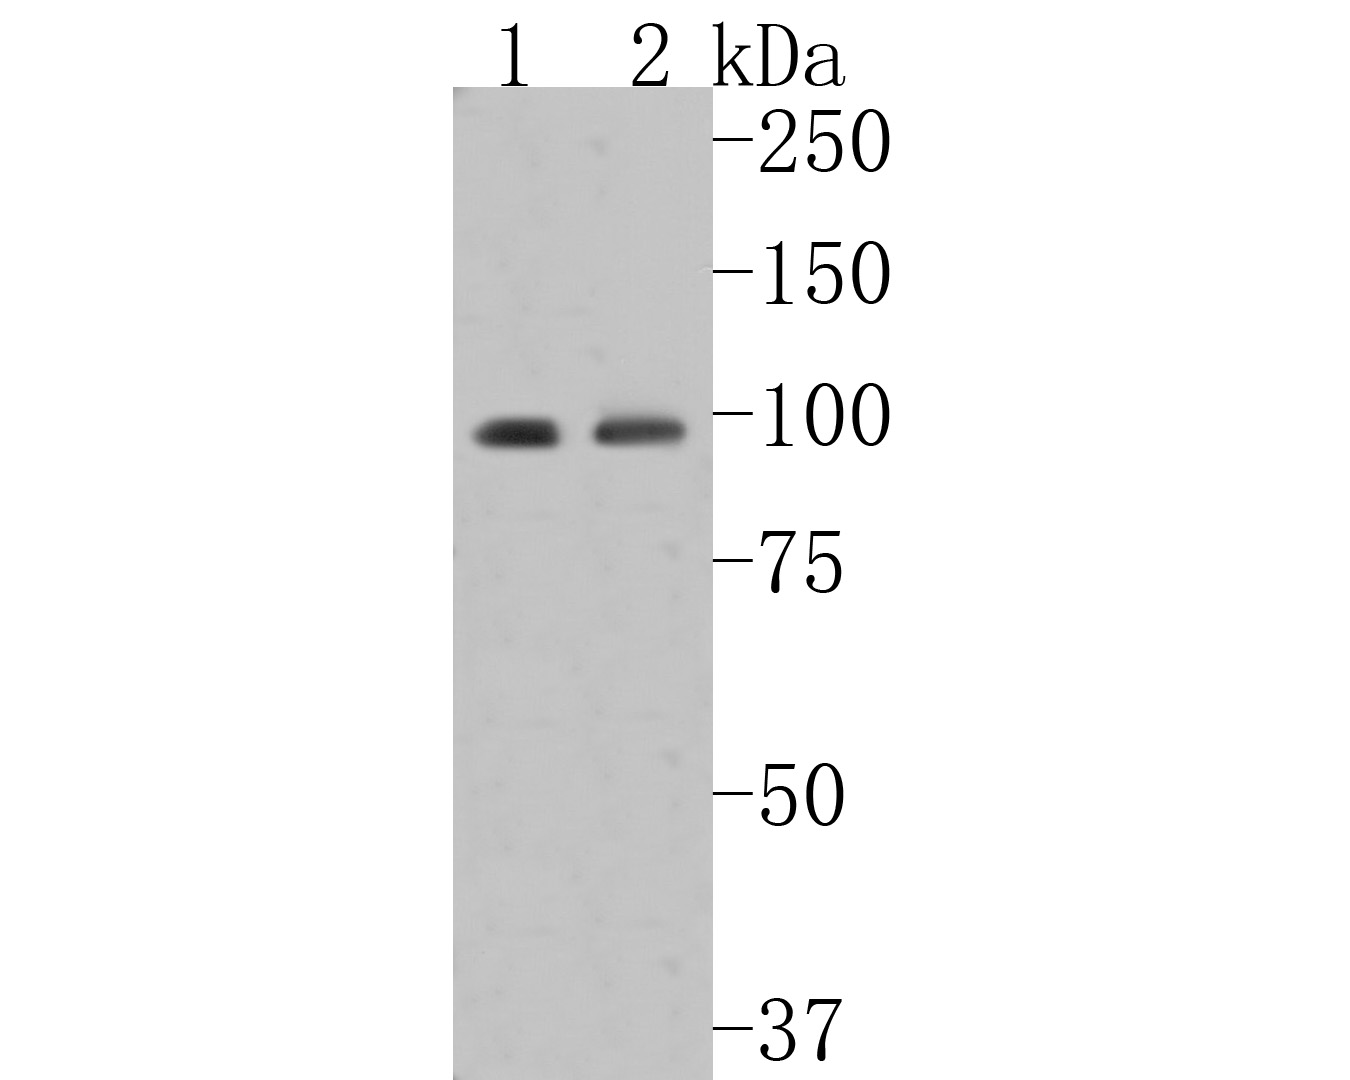 Western blot analysis of Insulin Receptor Beta on different lysates. Proteins were transferred to a PVDF membrane and blocked with 5% BSA in PBS for 1 hour at room temperature. The primary antibody (ET1611-90, 1/500) was used in 5% BSA at room temperature for 2 hours. Goat Anti-Rabbit IgG - HRP Secondary Antibody (HA1001) at 1:5,000 dilution was used for 1 hour at room temperature.<br />
Positive control: <br />
Lane 1: MCF-7 cell lysate<br />
Lane 2: 293 cell lysate<br />
<br />
Predicted band size: 156 kDa<br />
Observed band size: 100 kDa